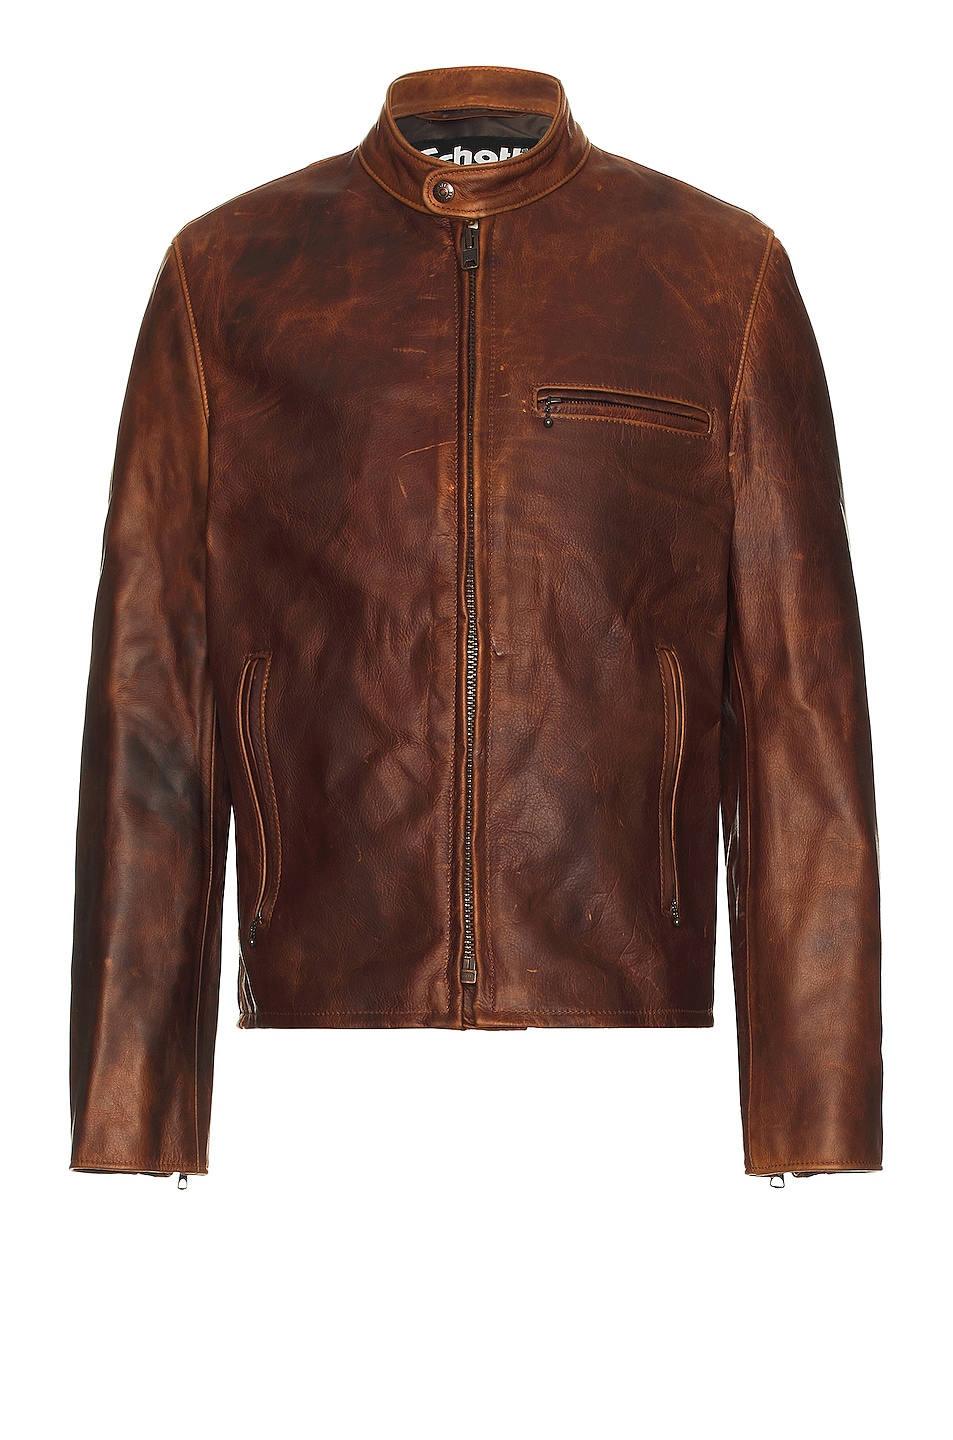 NYC Cafe Racer Jacket in Brown